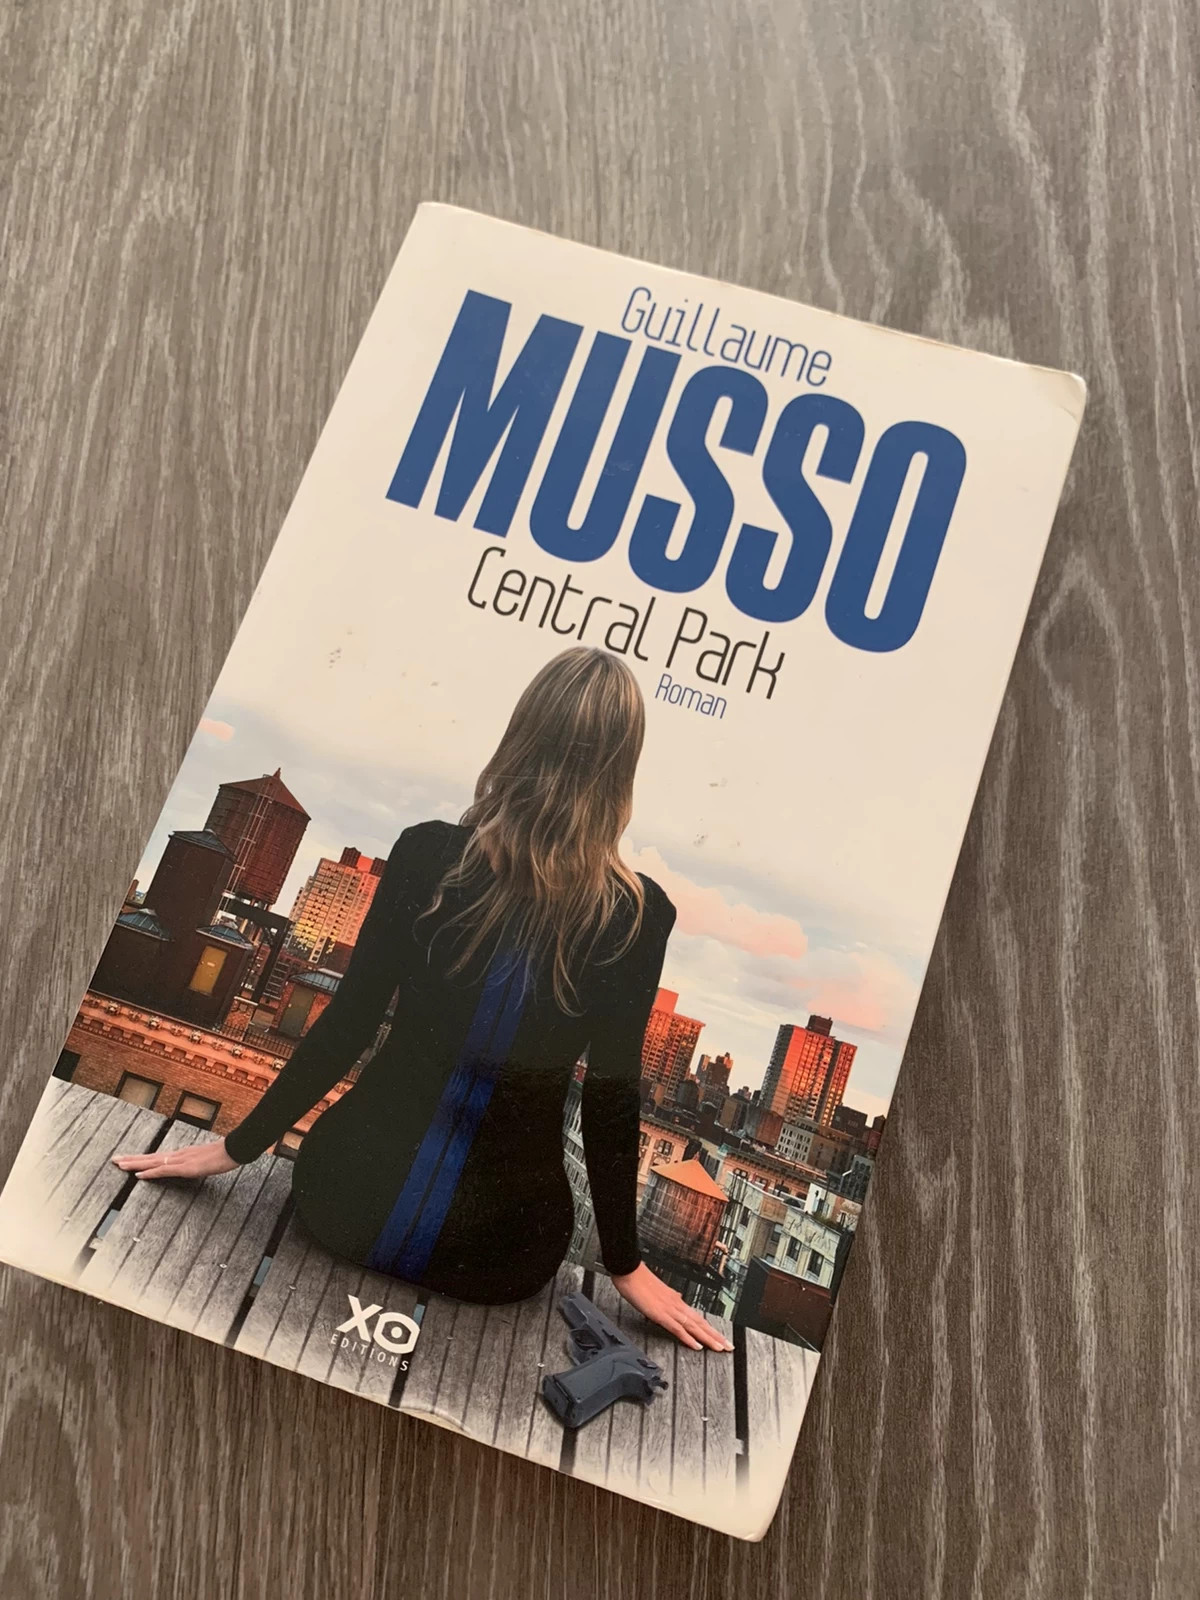 Guillaume Musso's Latest Novel Is Set In Central Park